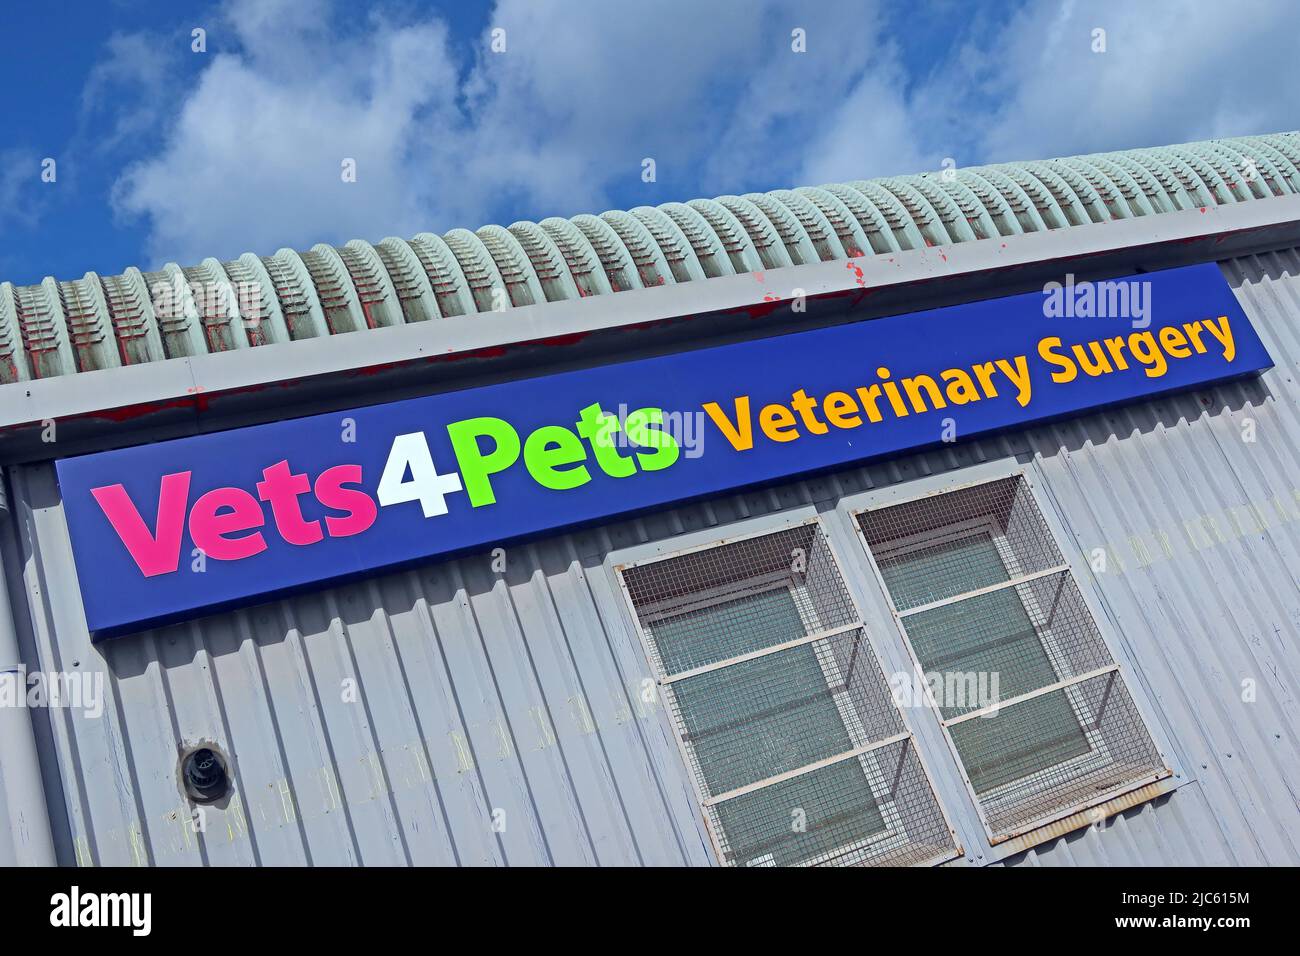 Vets4Pets Veterinary Surgery, Unit 2, Latchford House, Thelwall LN, Latchford East, Warrington, Cheshire, Angleterre, Royaume-Uni, WA4 1LW Banque D'Images